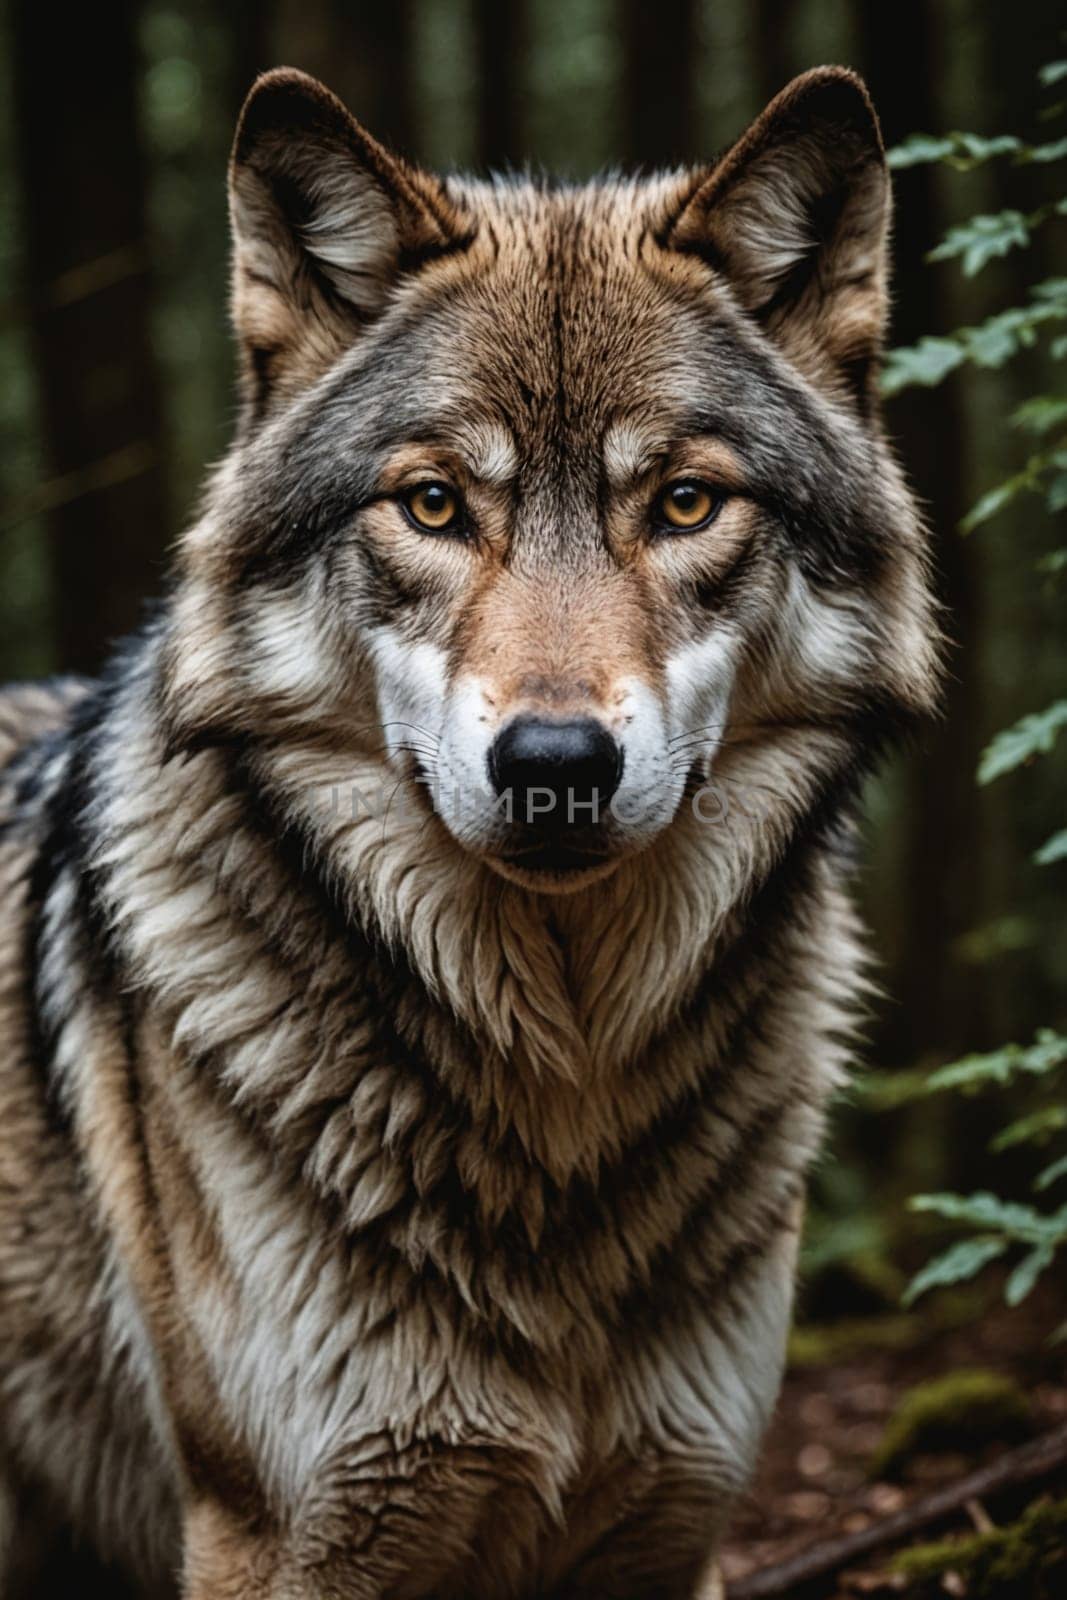 Predator's Poise: The Focused Stare of a Wolf Through the Lens by Andre1ns